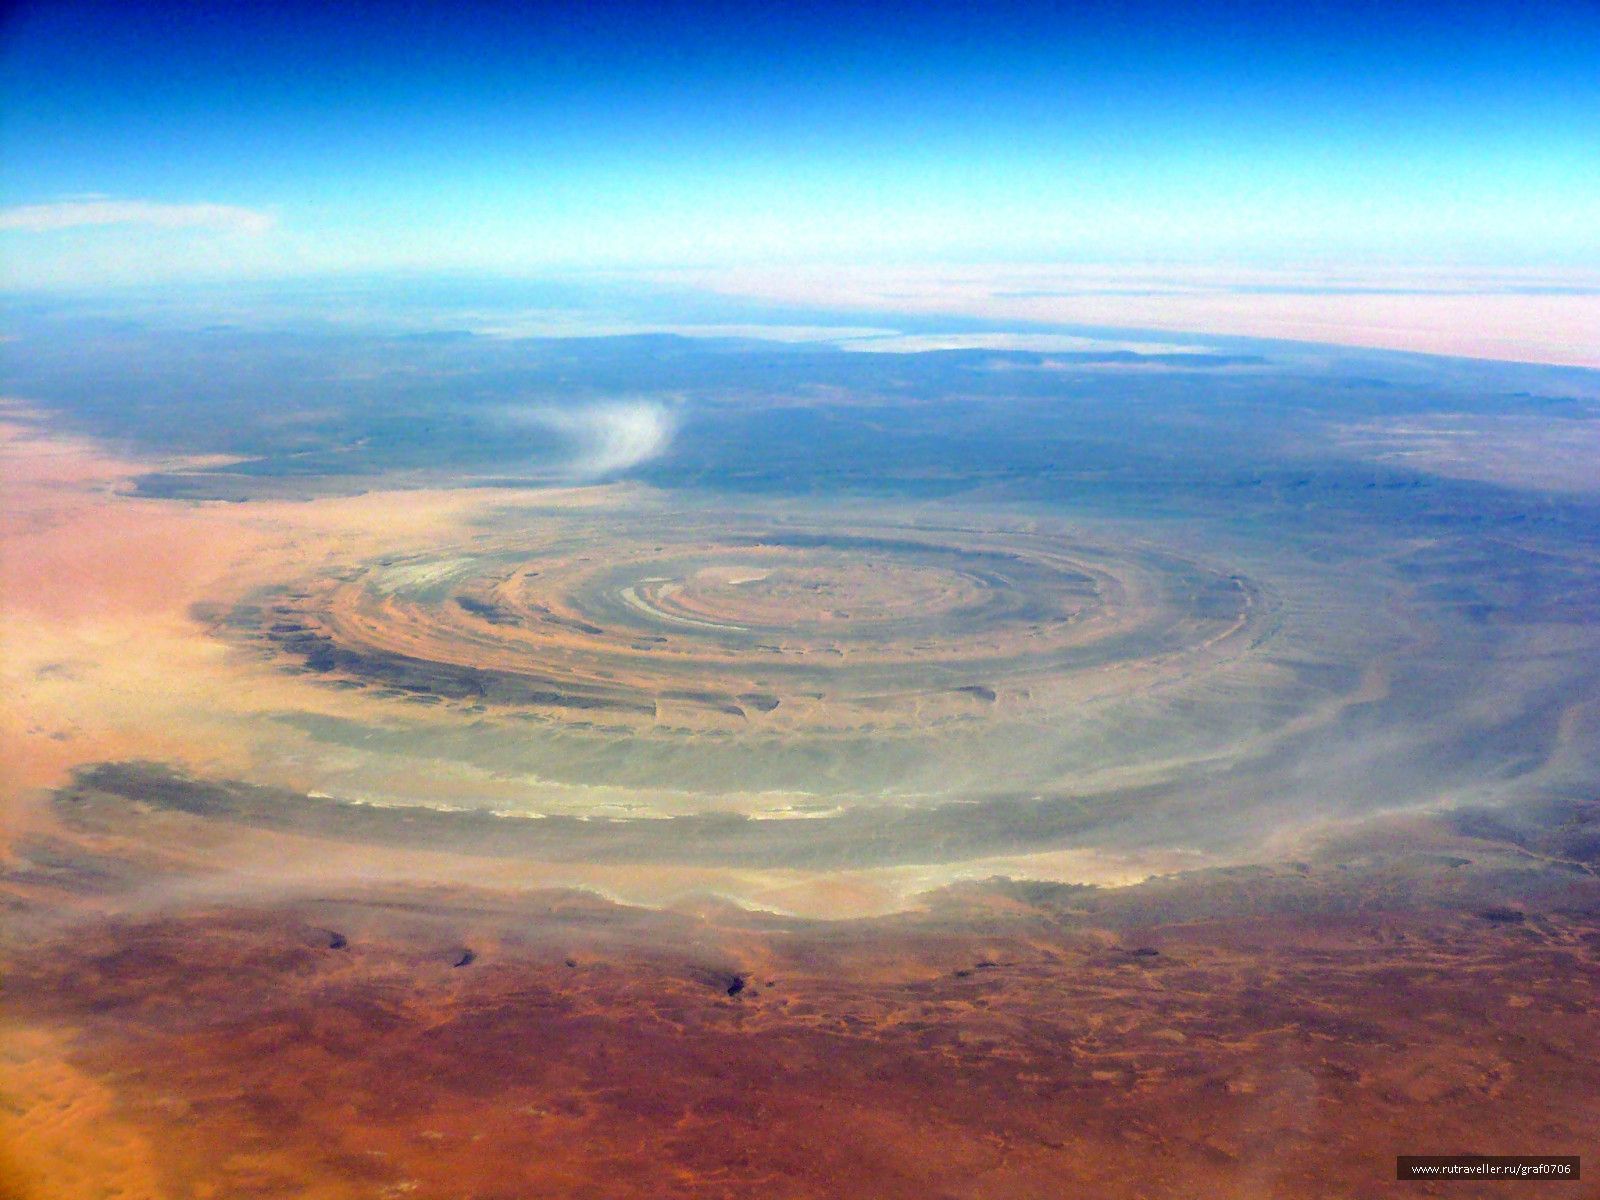 Richat Structure - Most mysterious places in the world